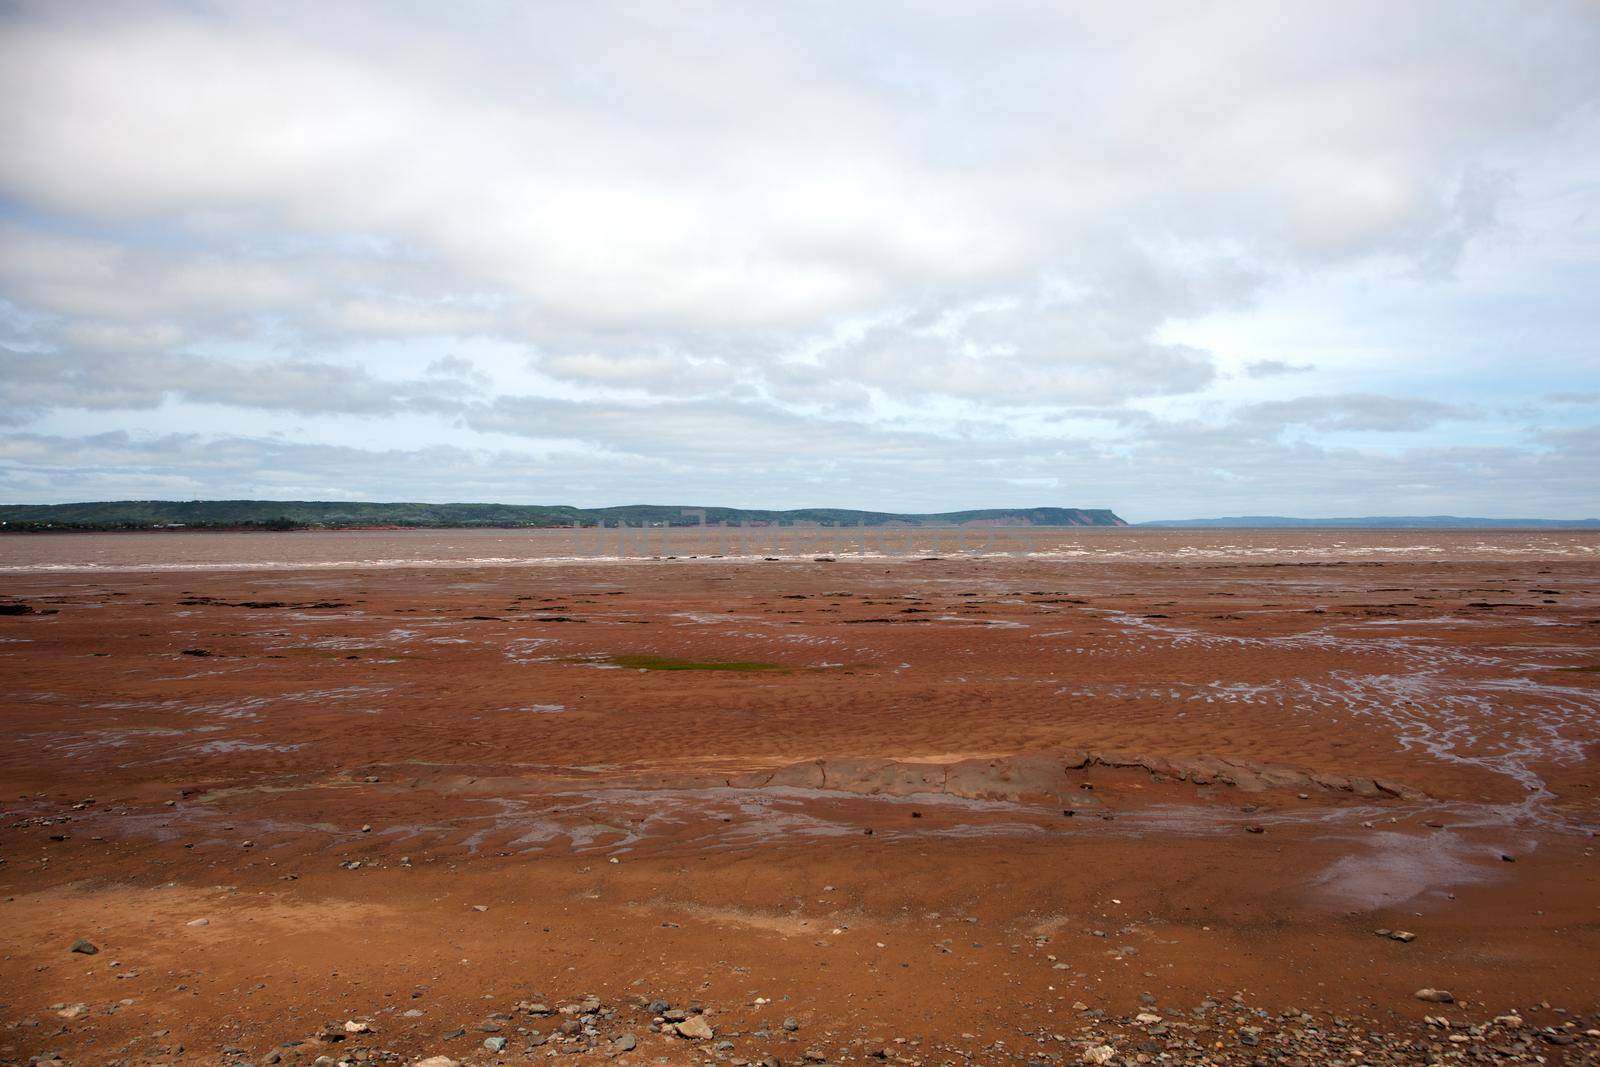 Across the Bay of Fundy to Cape Blomidon in Nova Scotia